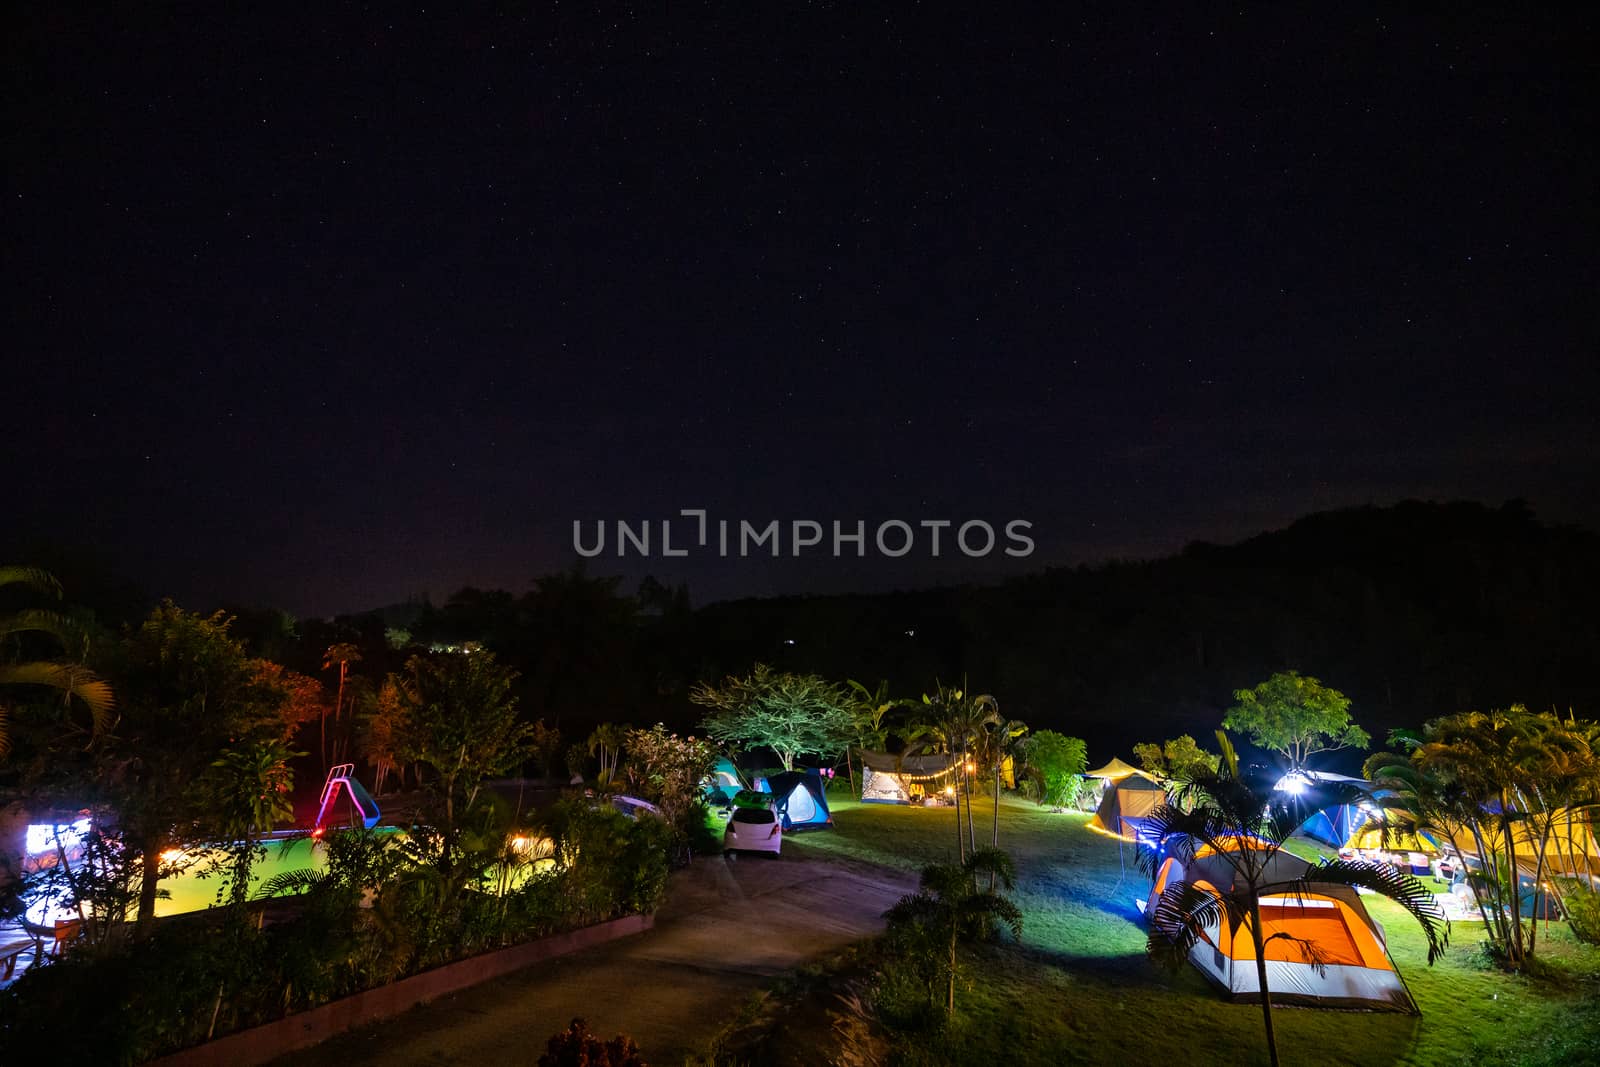 Camping and tent in nature park at night by domonite